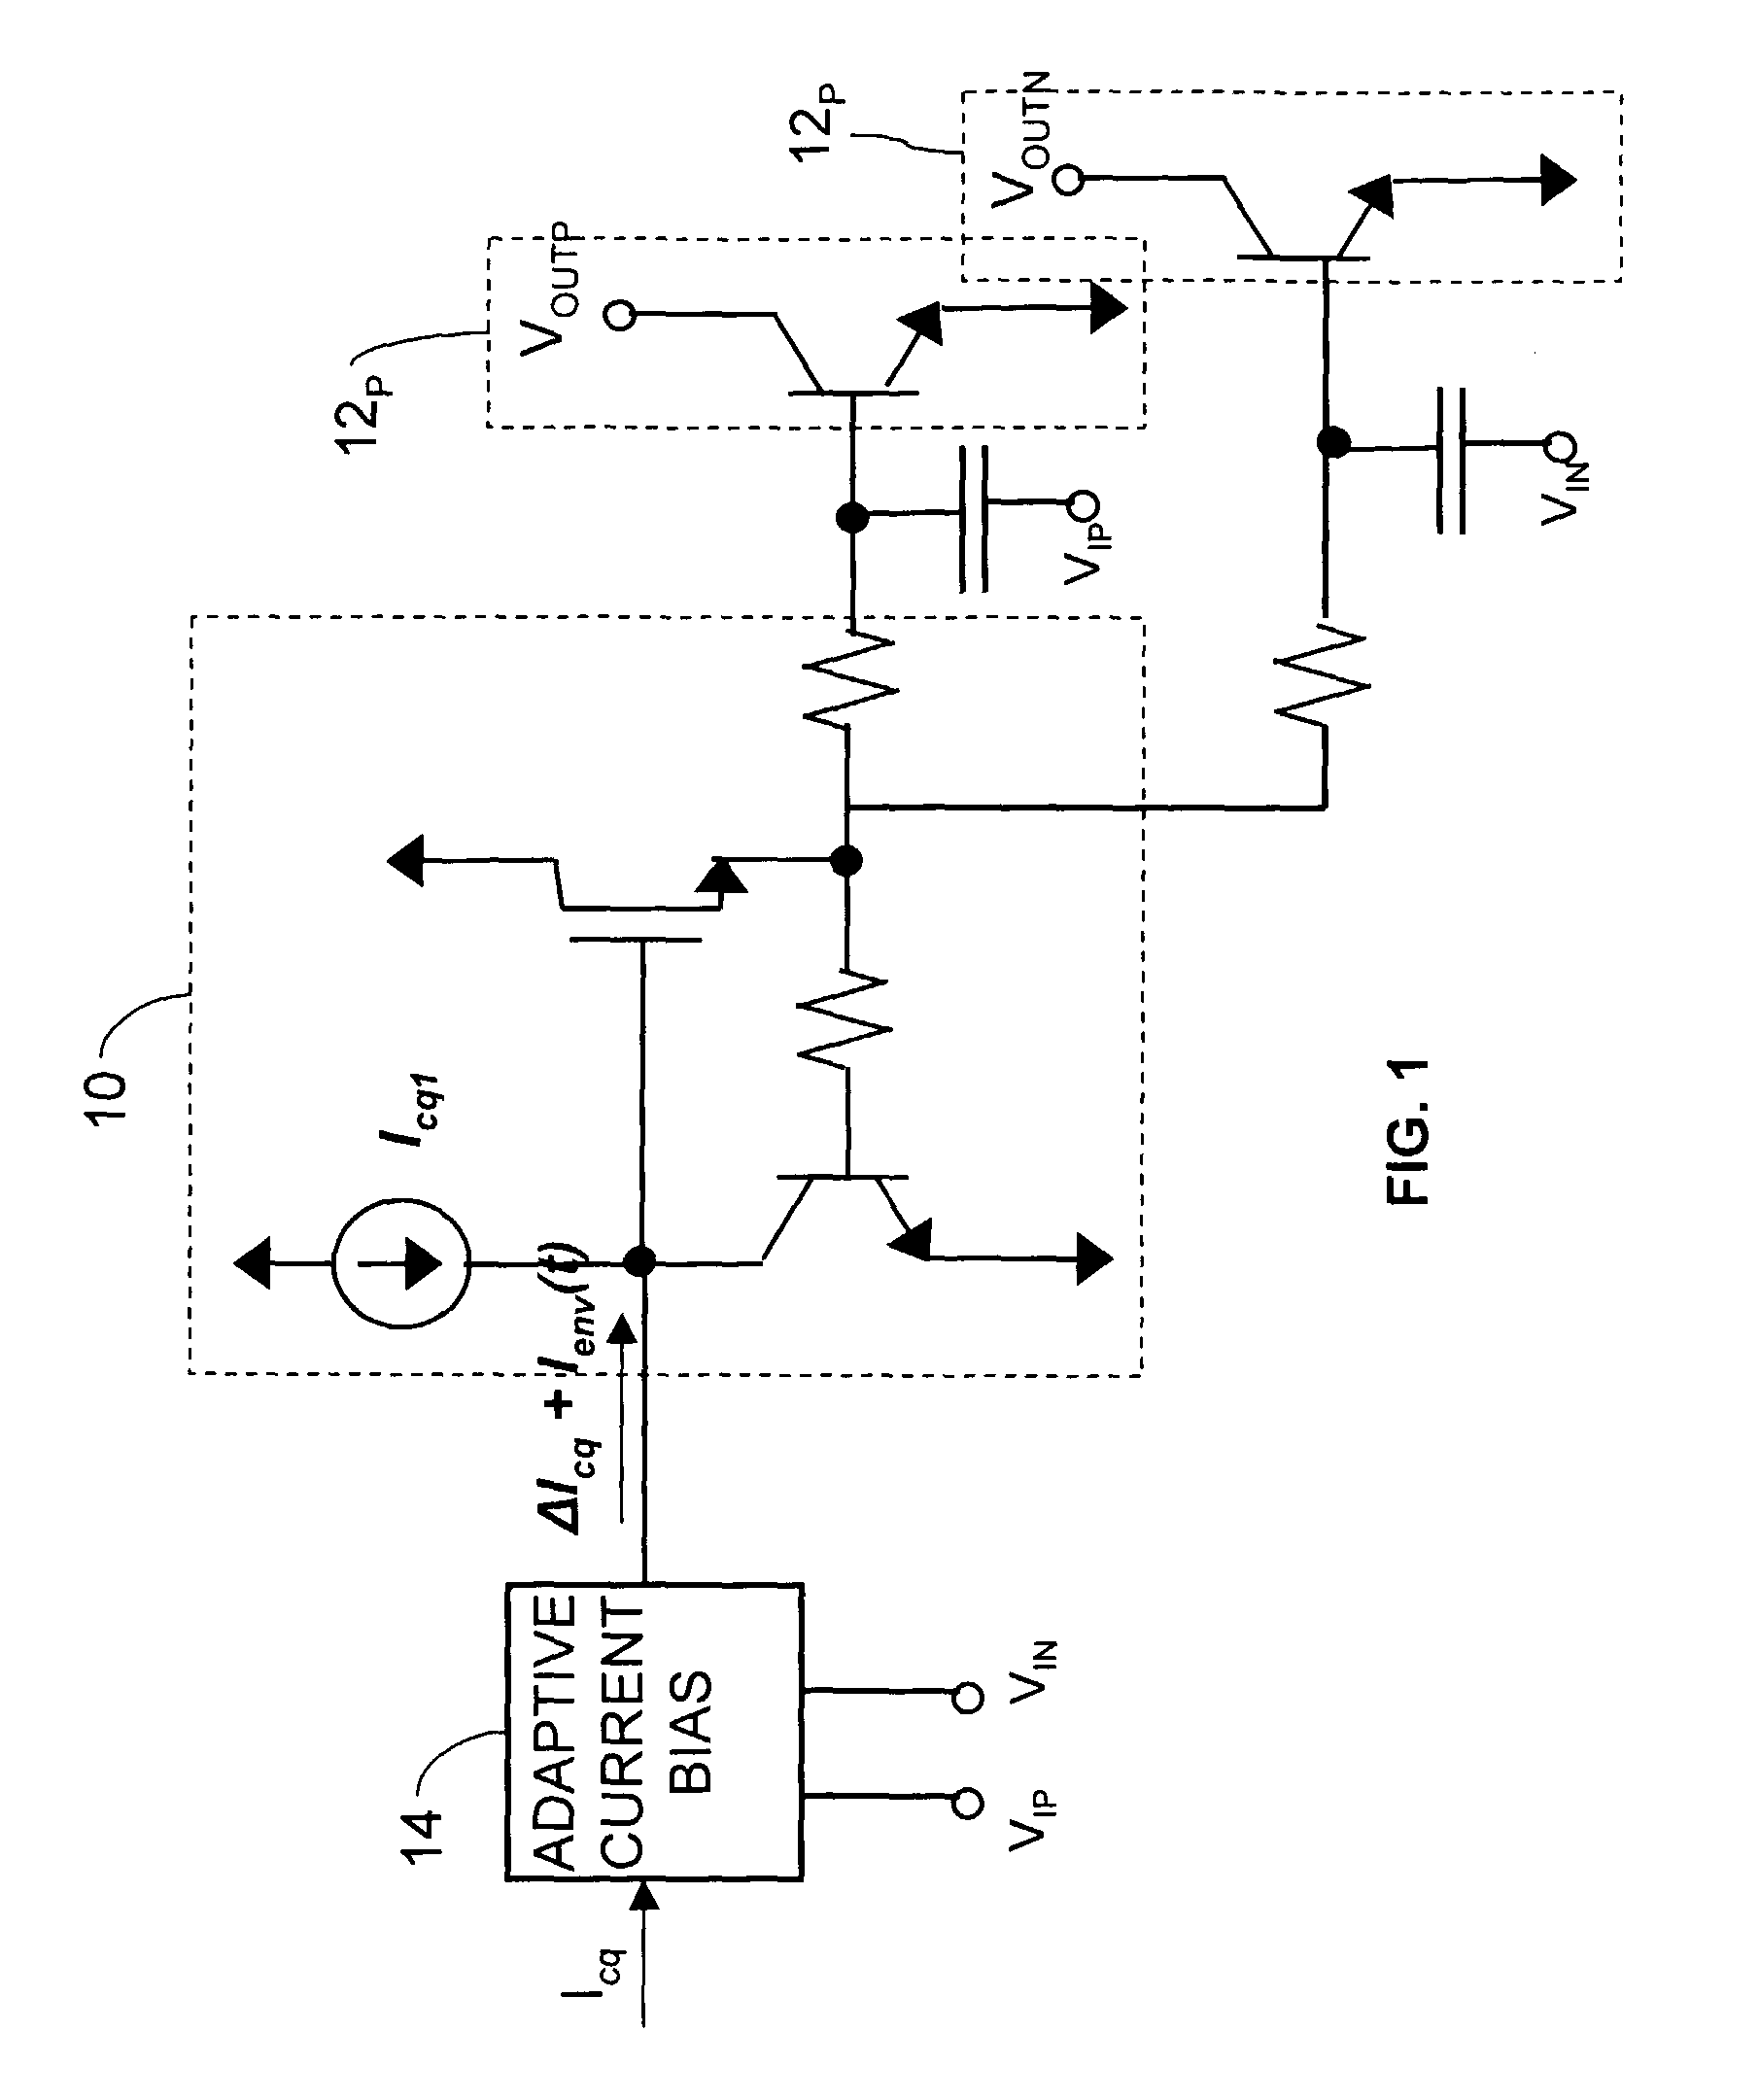 Adaptive Bias Current Circuit and Method for Amplifiers